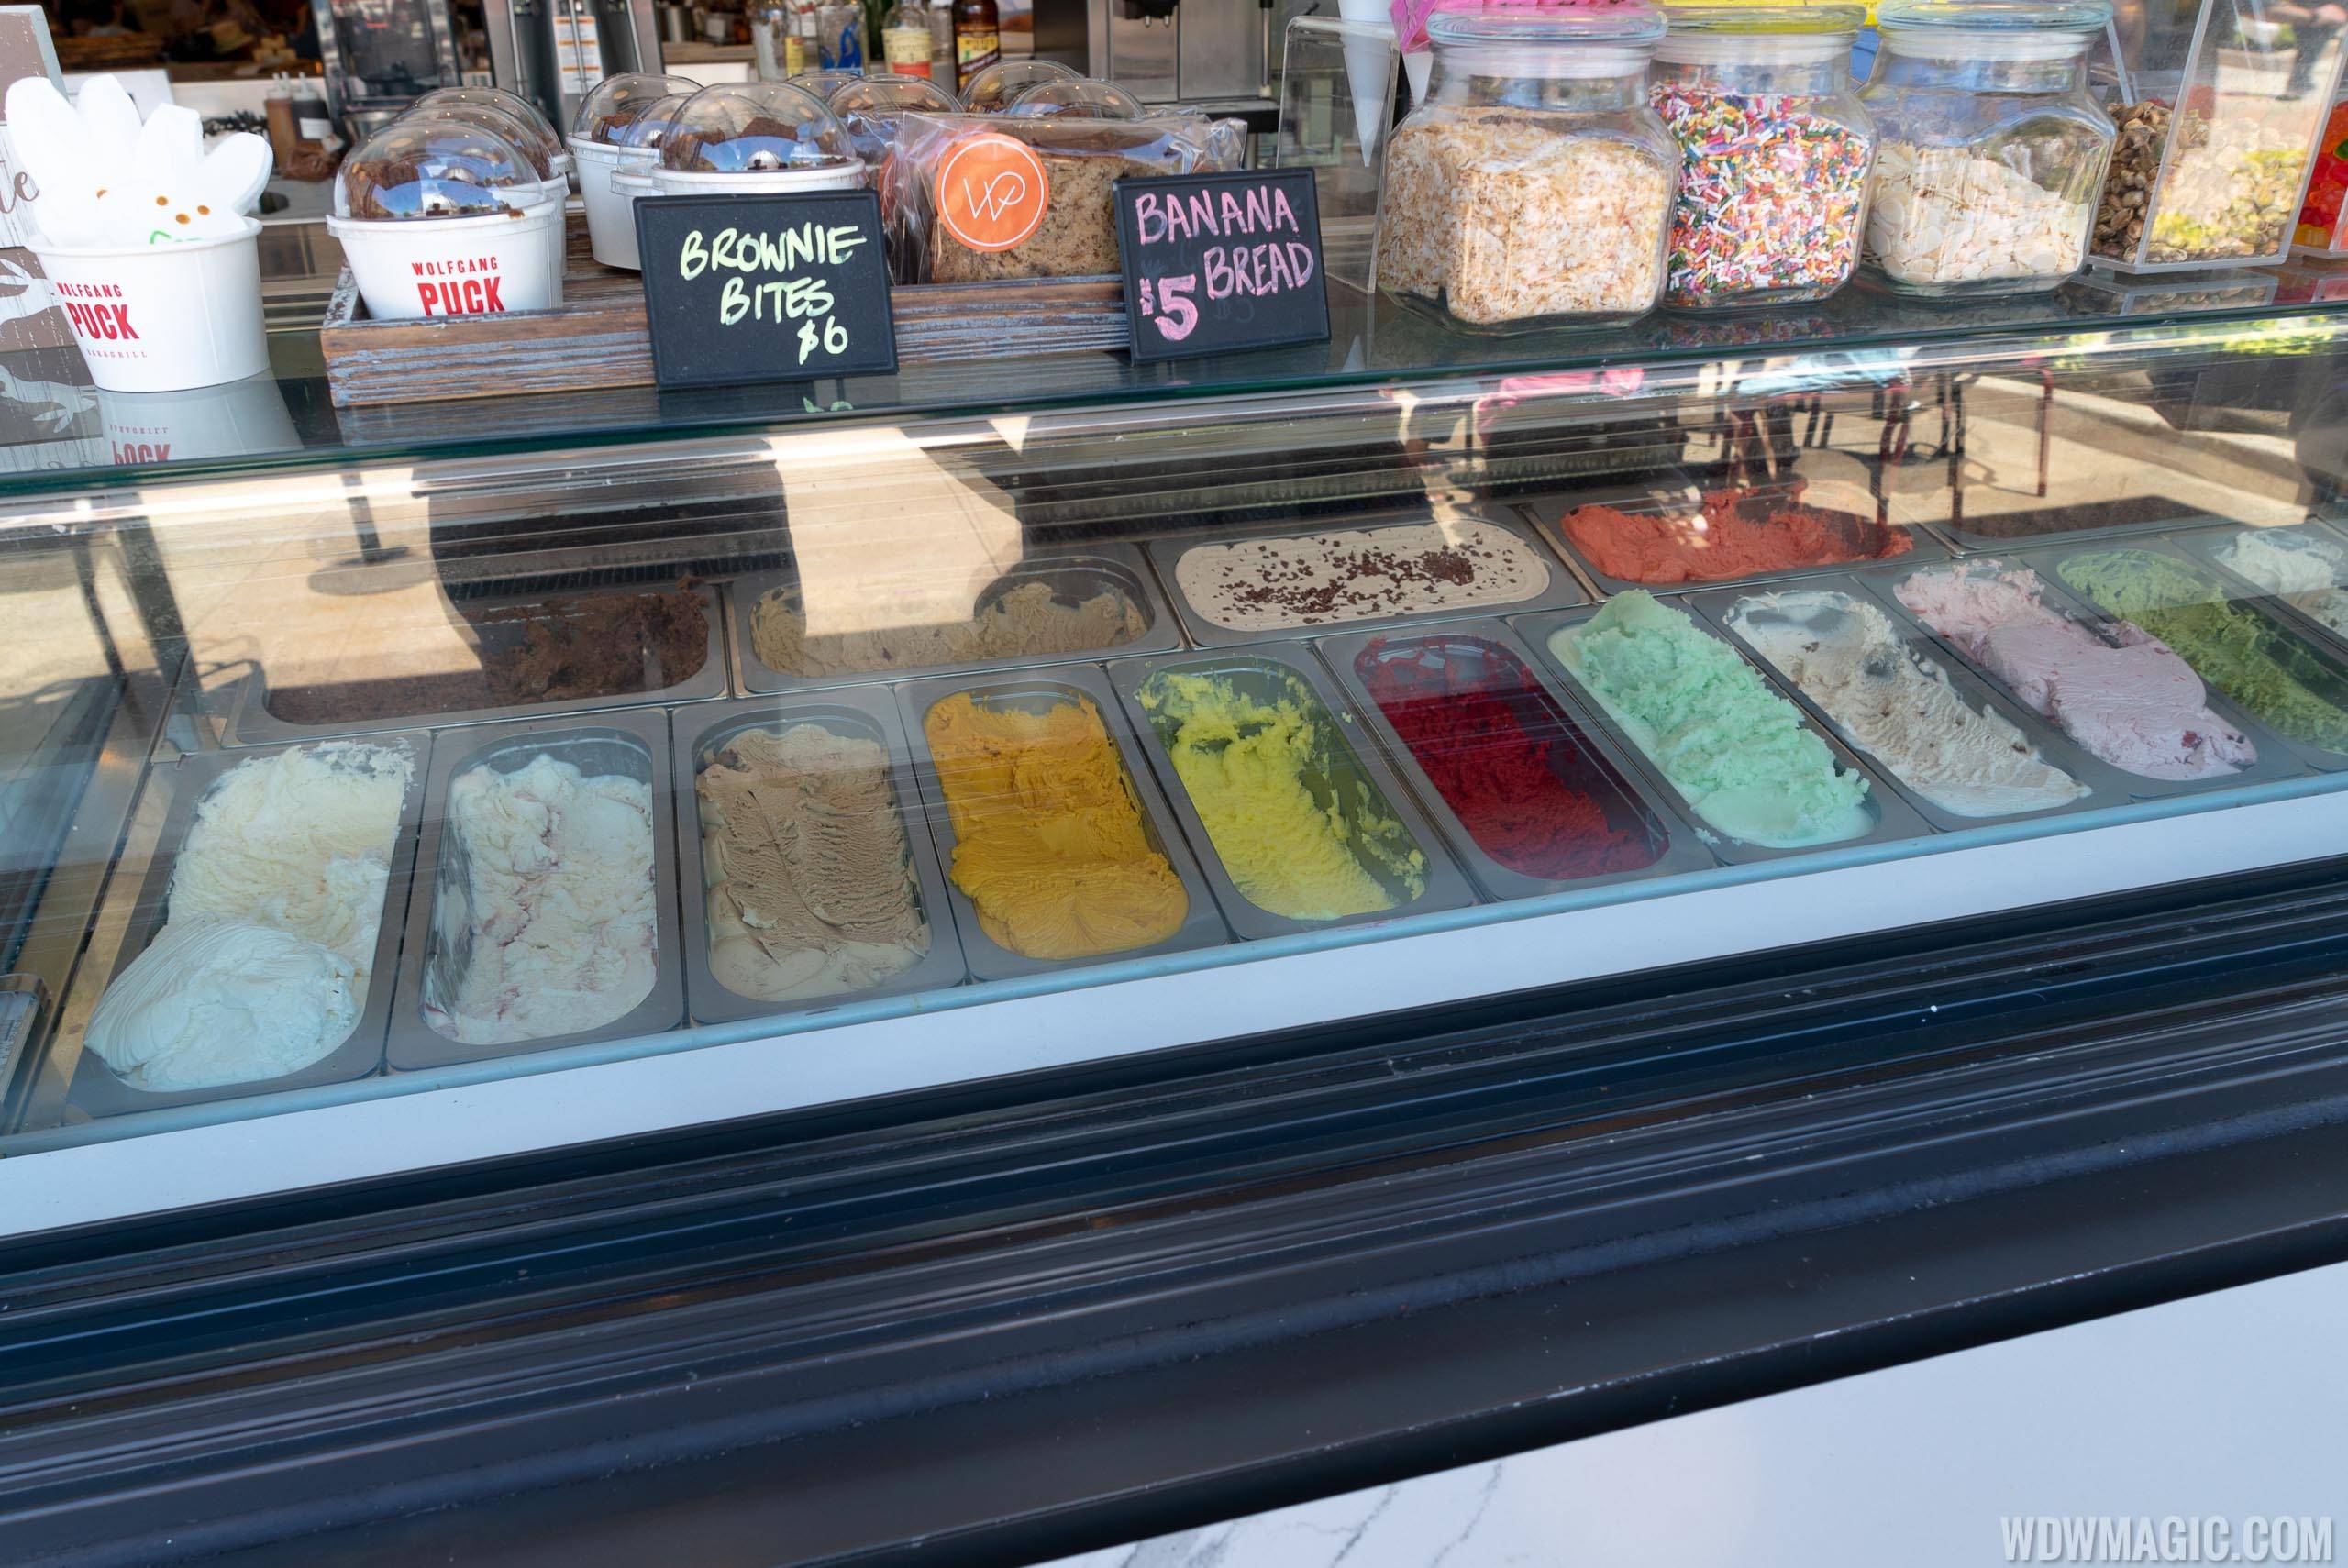 Puck's Gelateria at Wolfgang Puck Bar and Grill Disney Springs